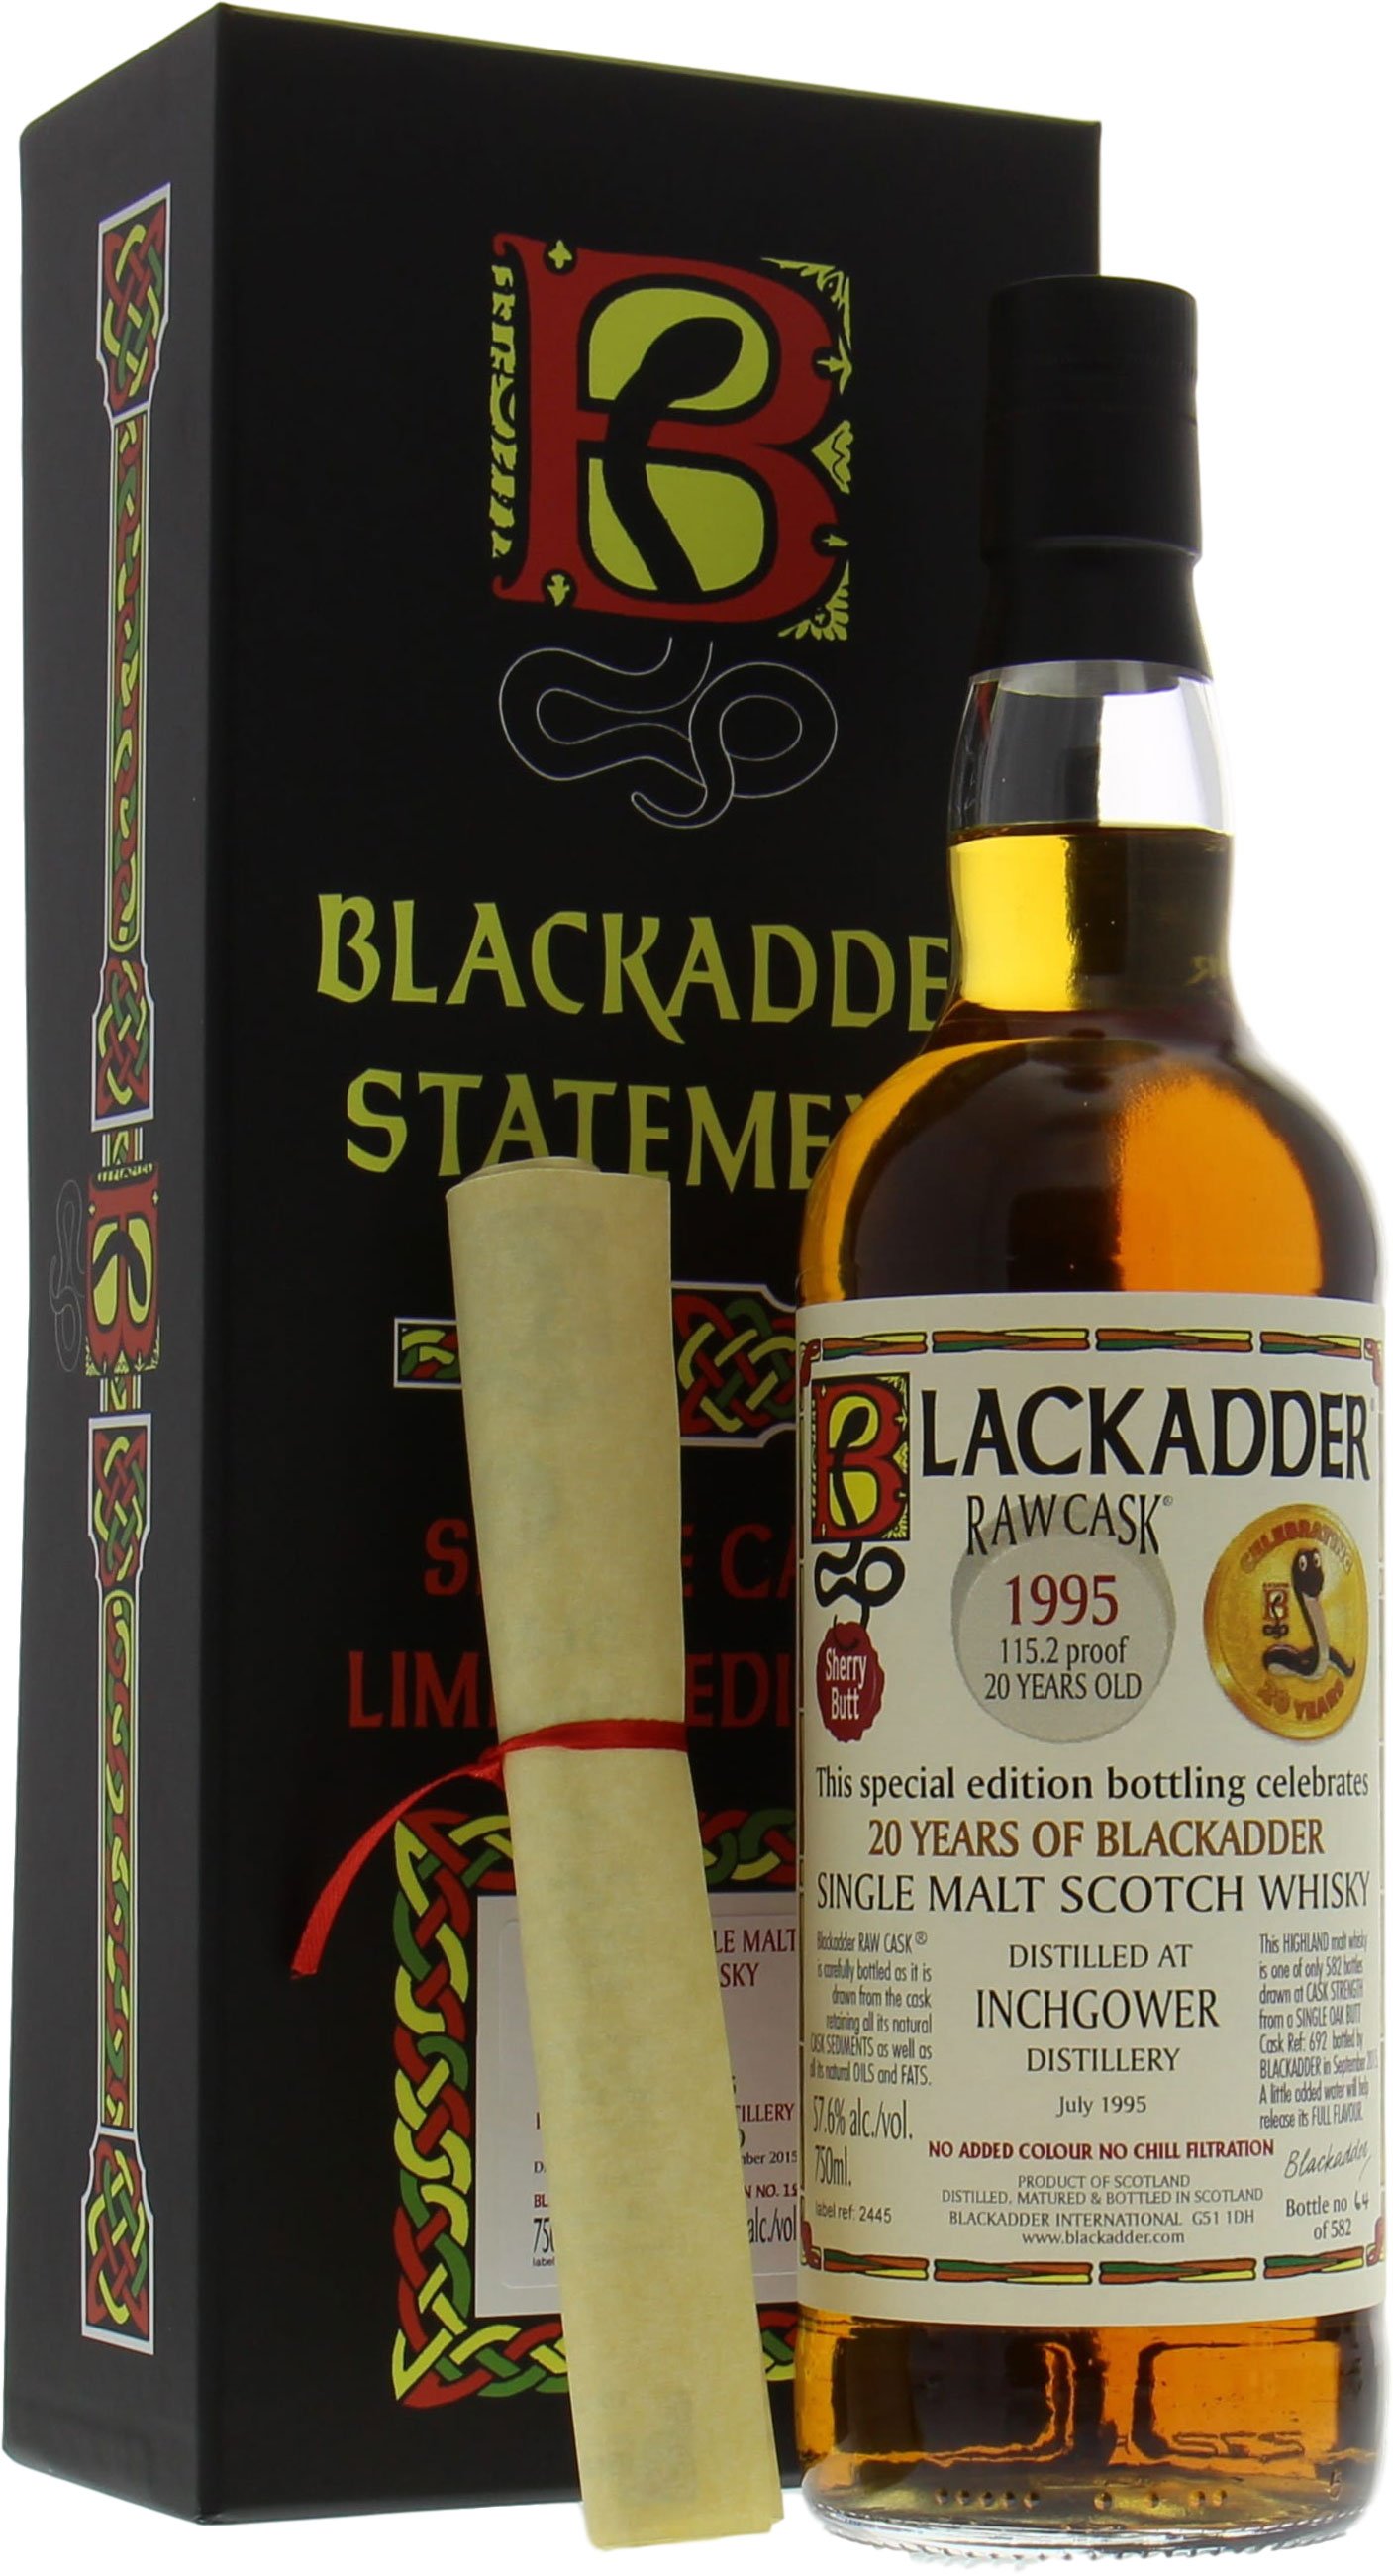 Inchgower - 20 Years Old Celebration 20 Years of Blackadder Raw Cask:692 57,6% 1995 In Original Container